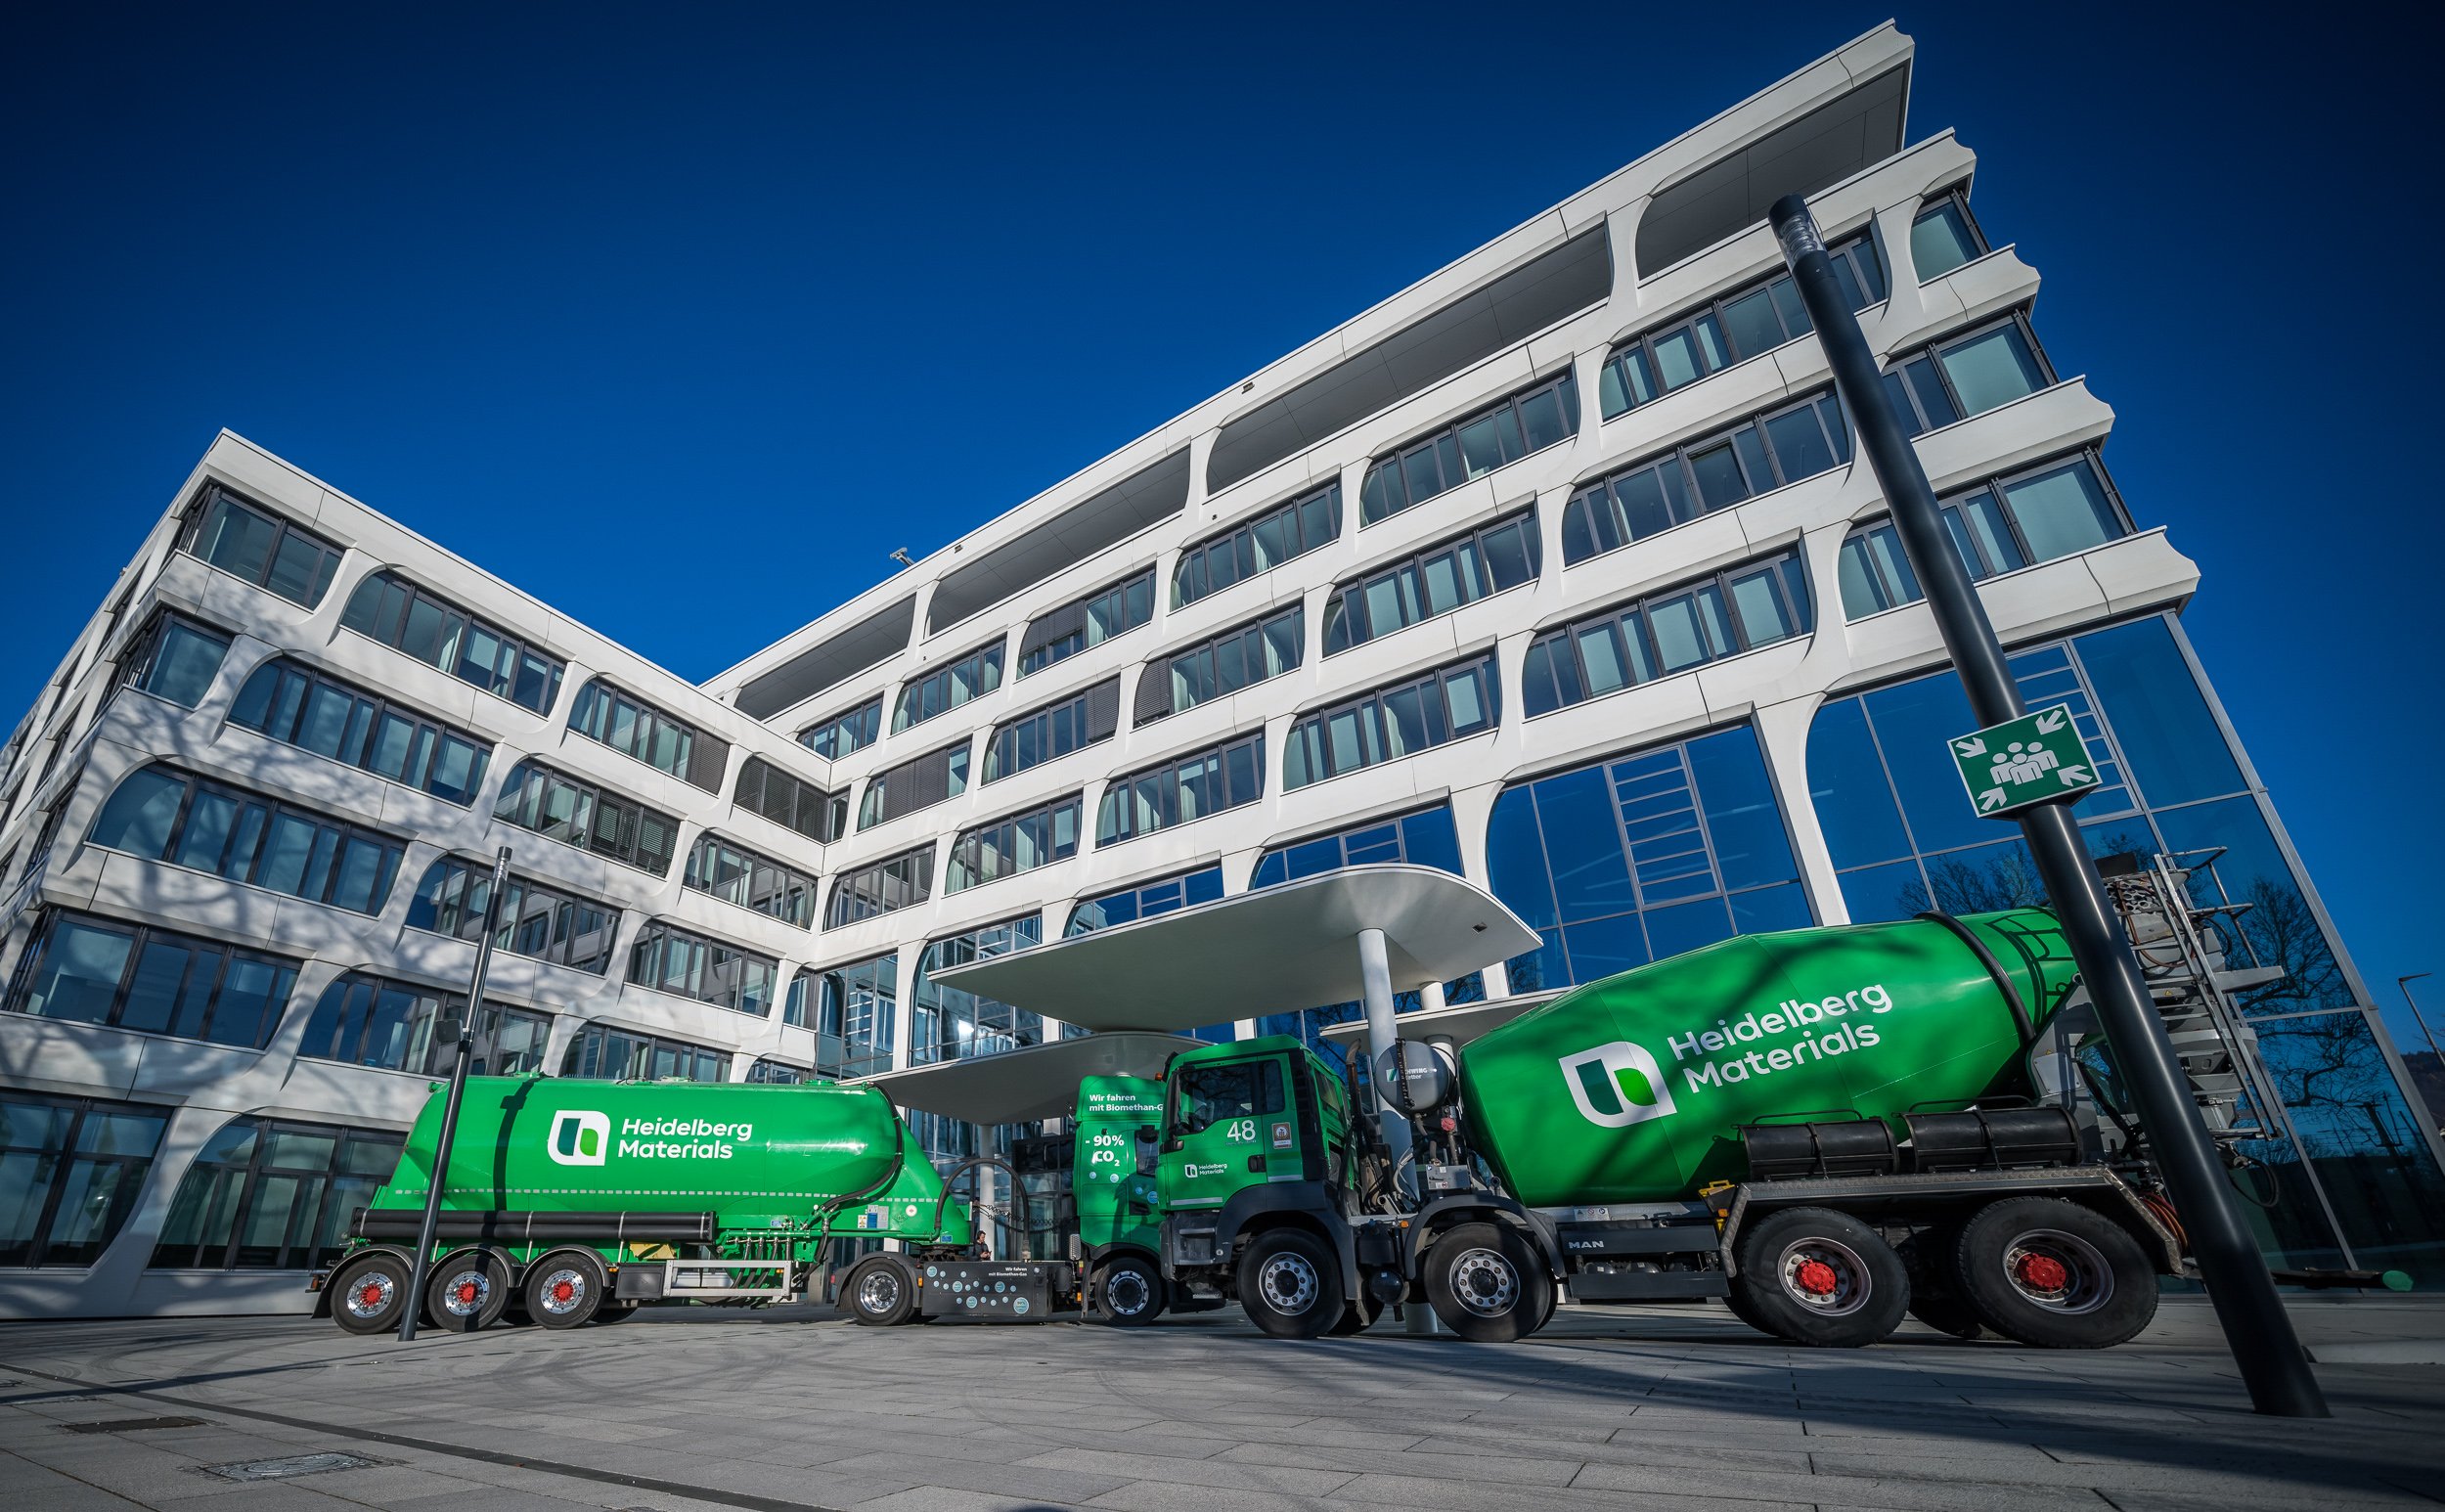 Modern office building, with ready-mix trucks labelled Heidelberg Materials in front of it